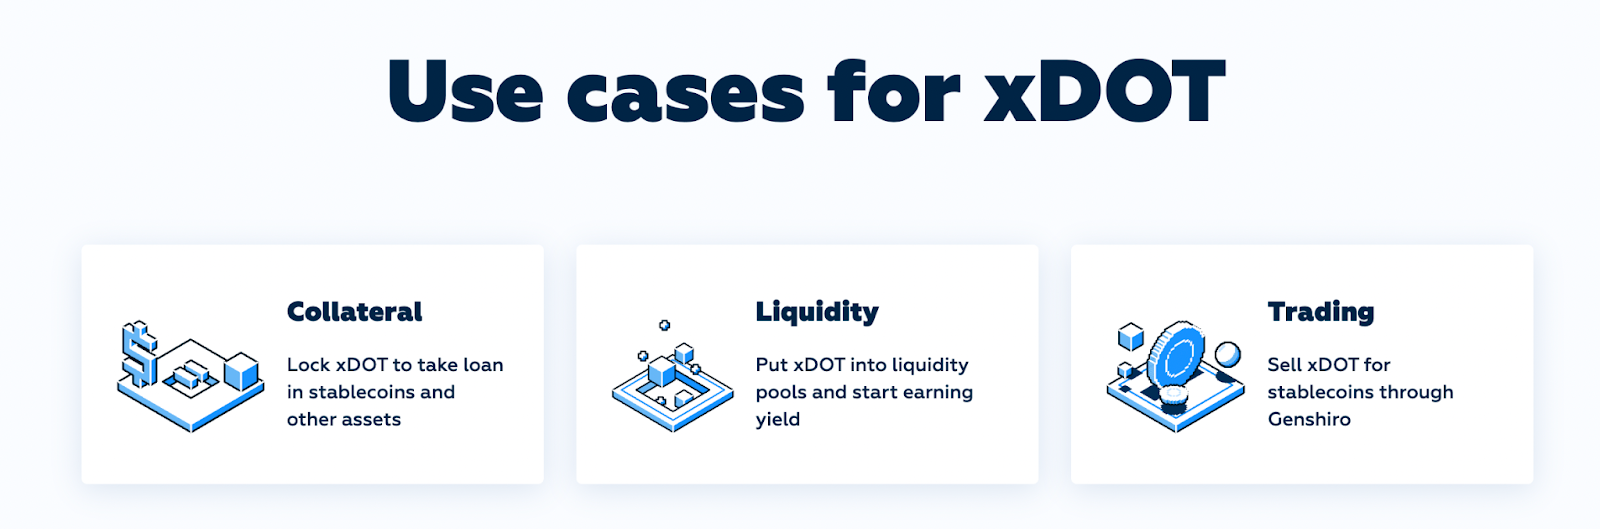 Use cases for xDOT